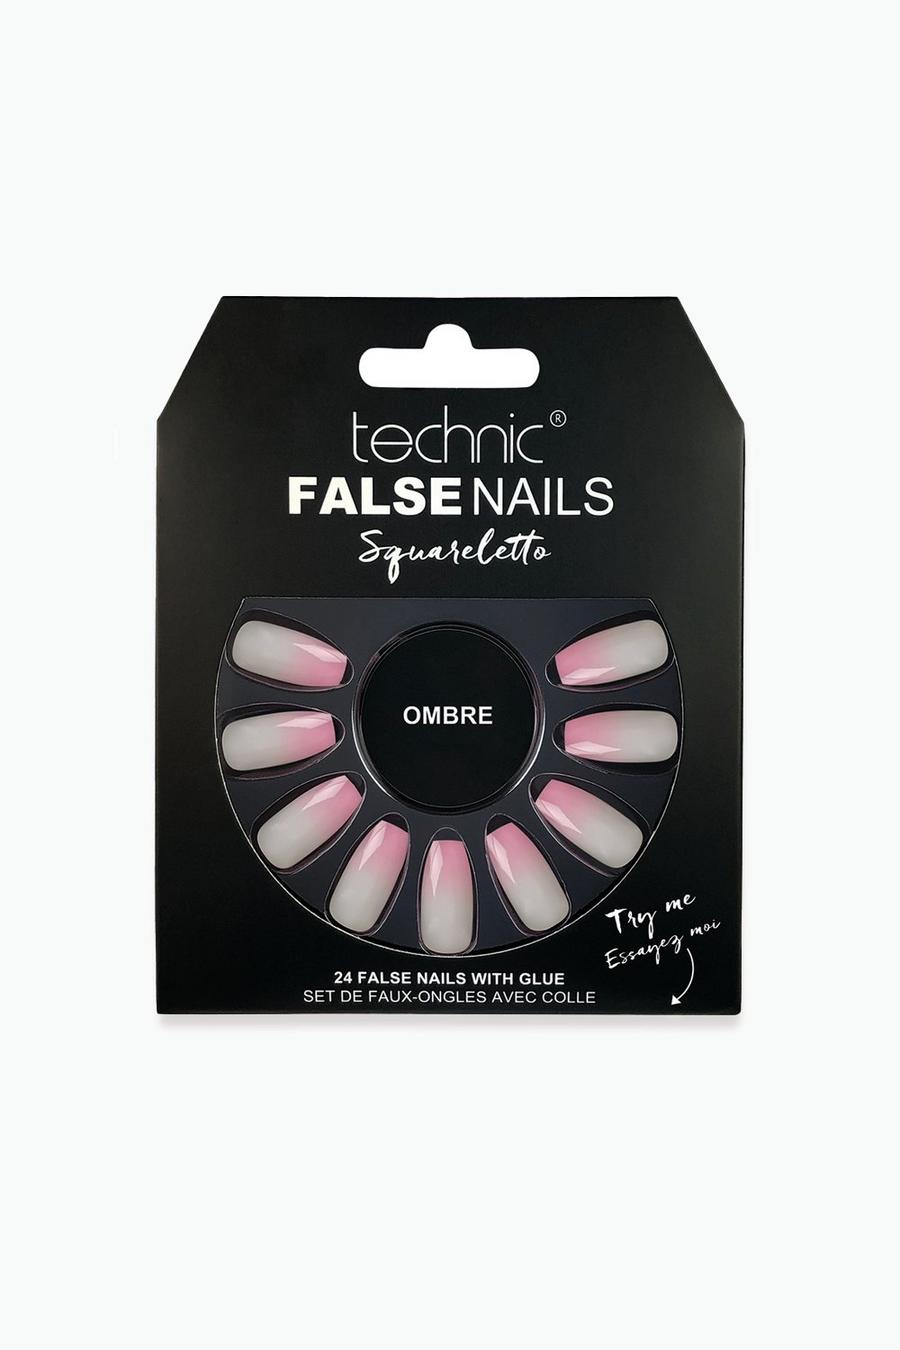 Technic Unghie finte - Squareletto, Ombre, Pink rosa image number 1